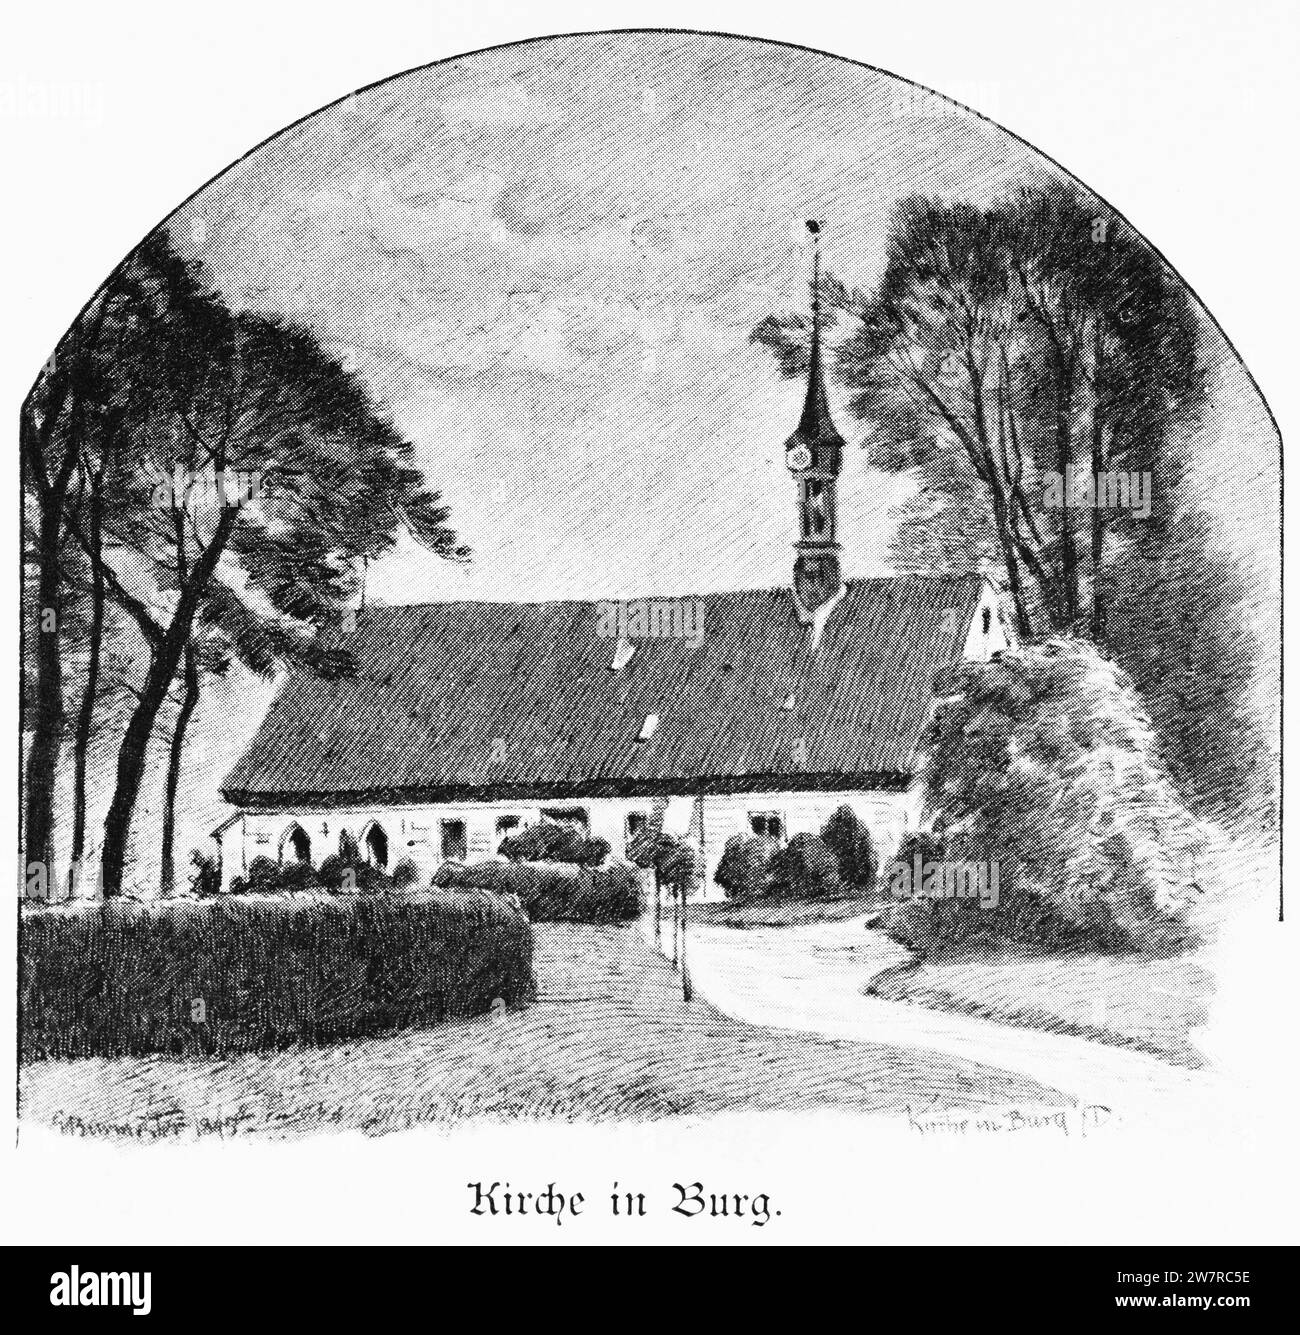 Church in the small country town of Burg, Dithmarschen, Schleswig-Holstein, Northern Germany, Central Europe, histrorical Illustration 1896 Stock Photo